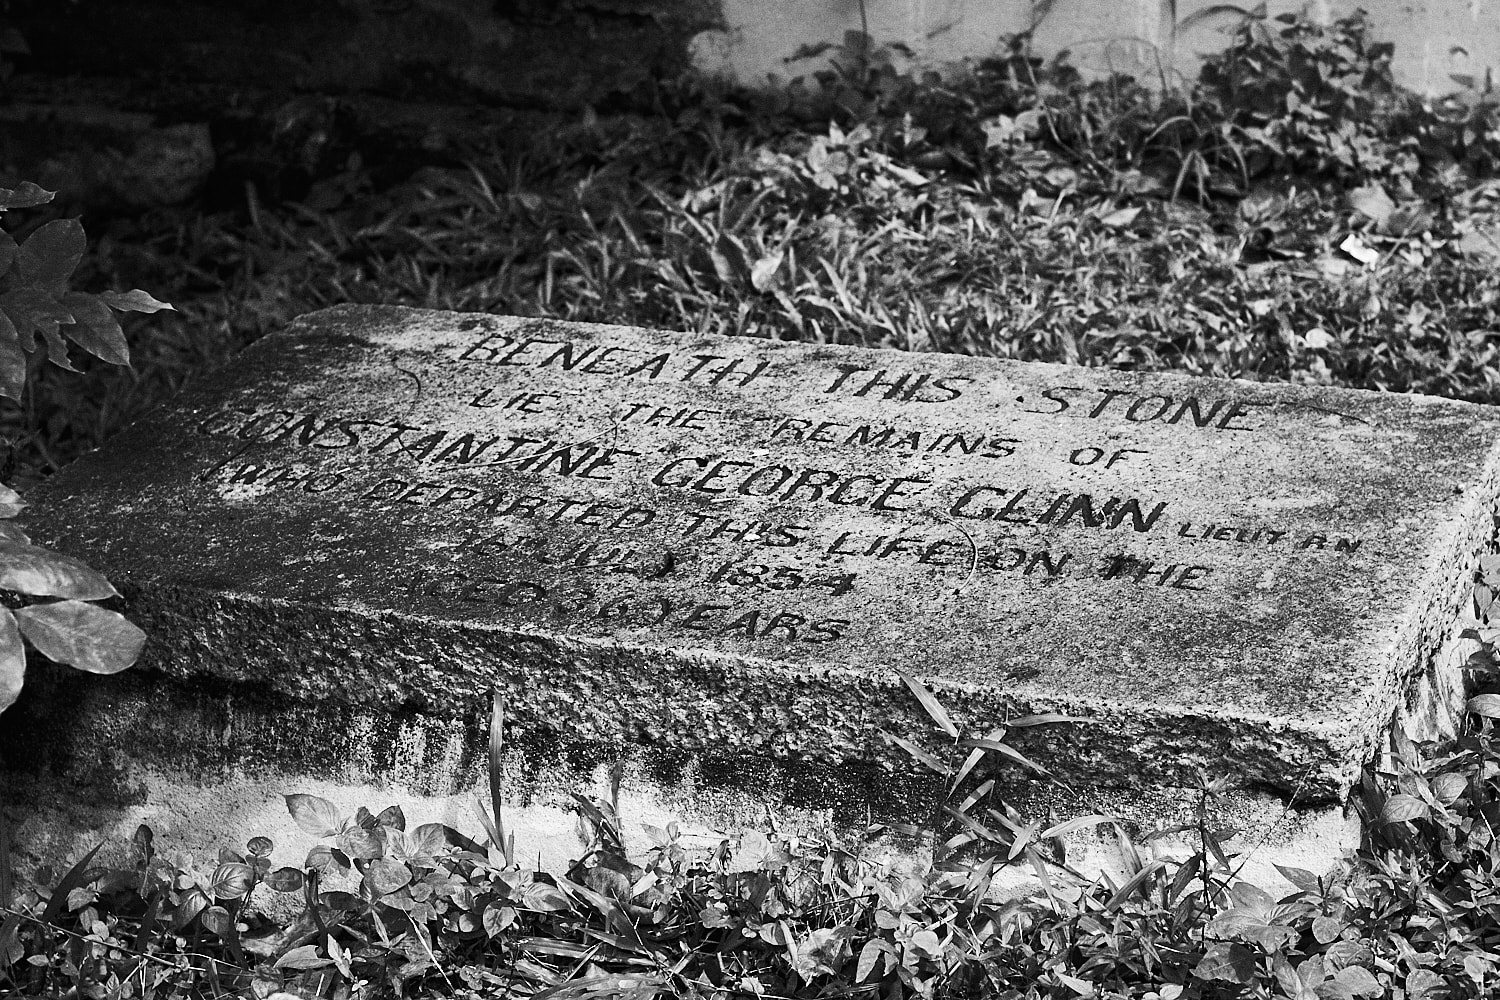 The grave of Constantine George Glinn in Penang Malaysia